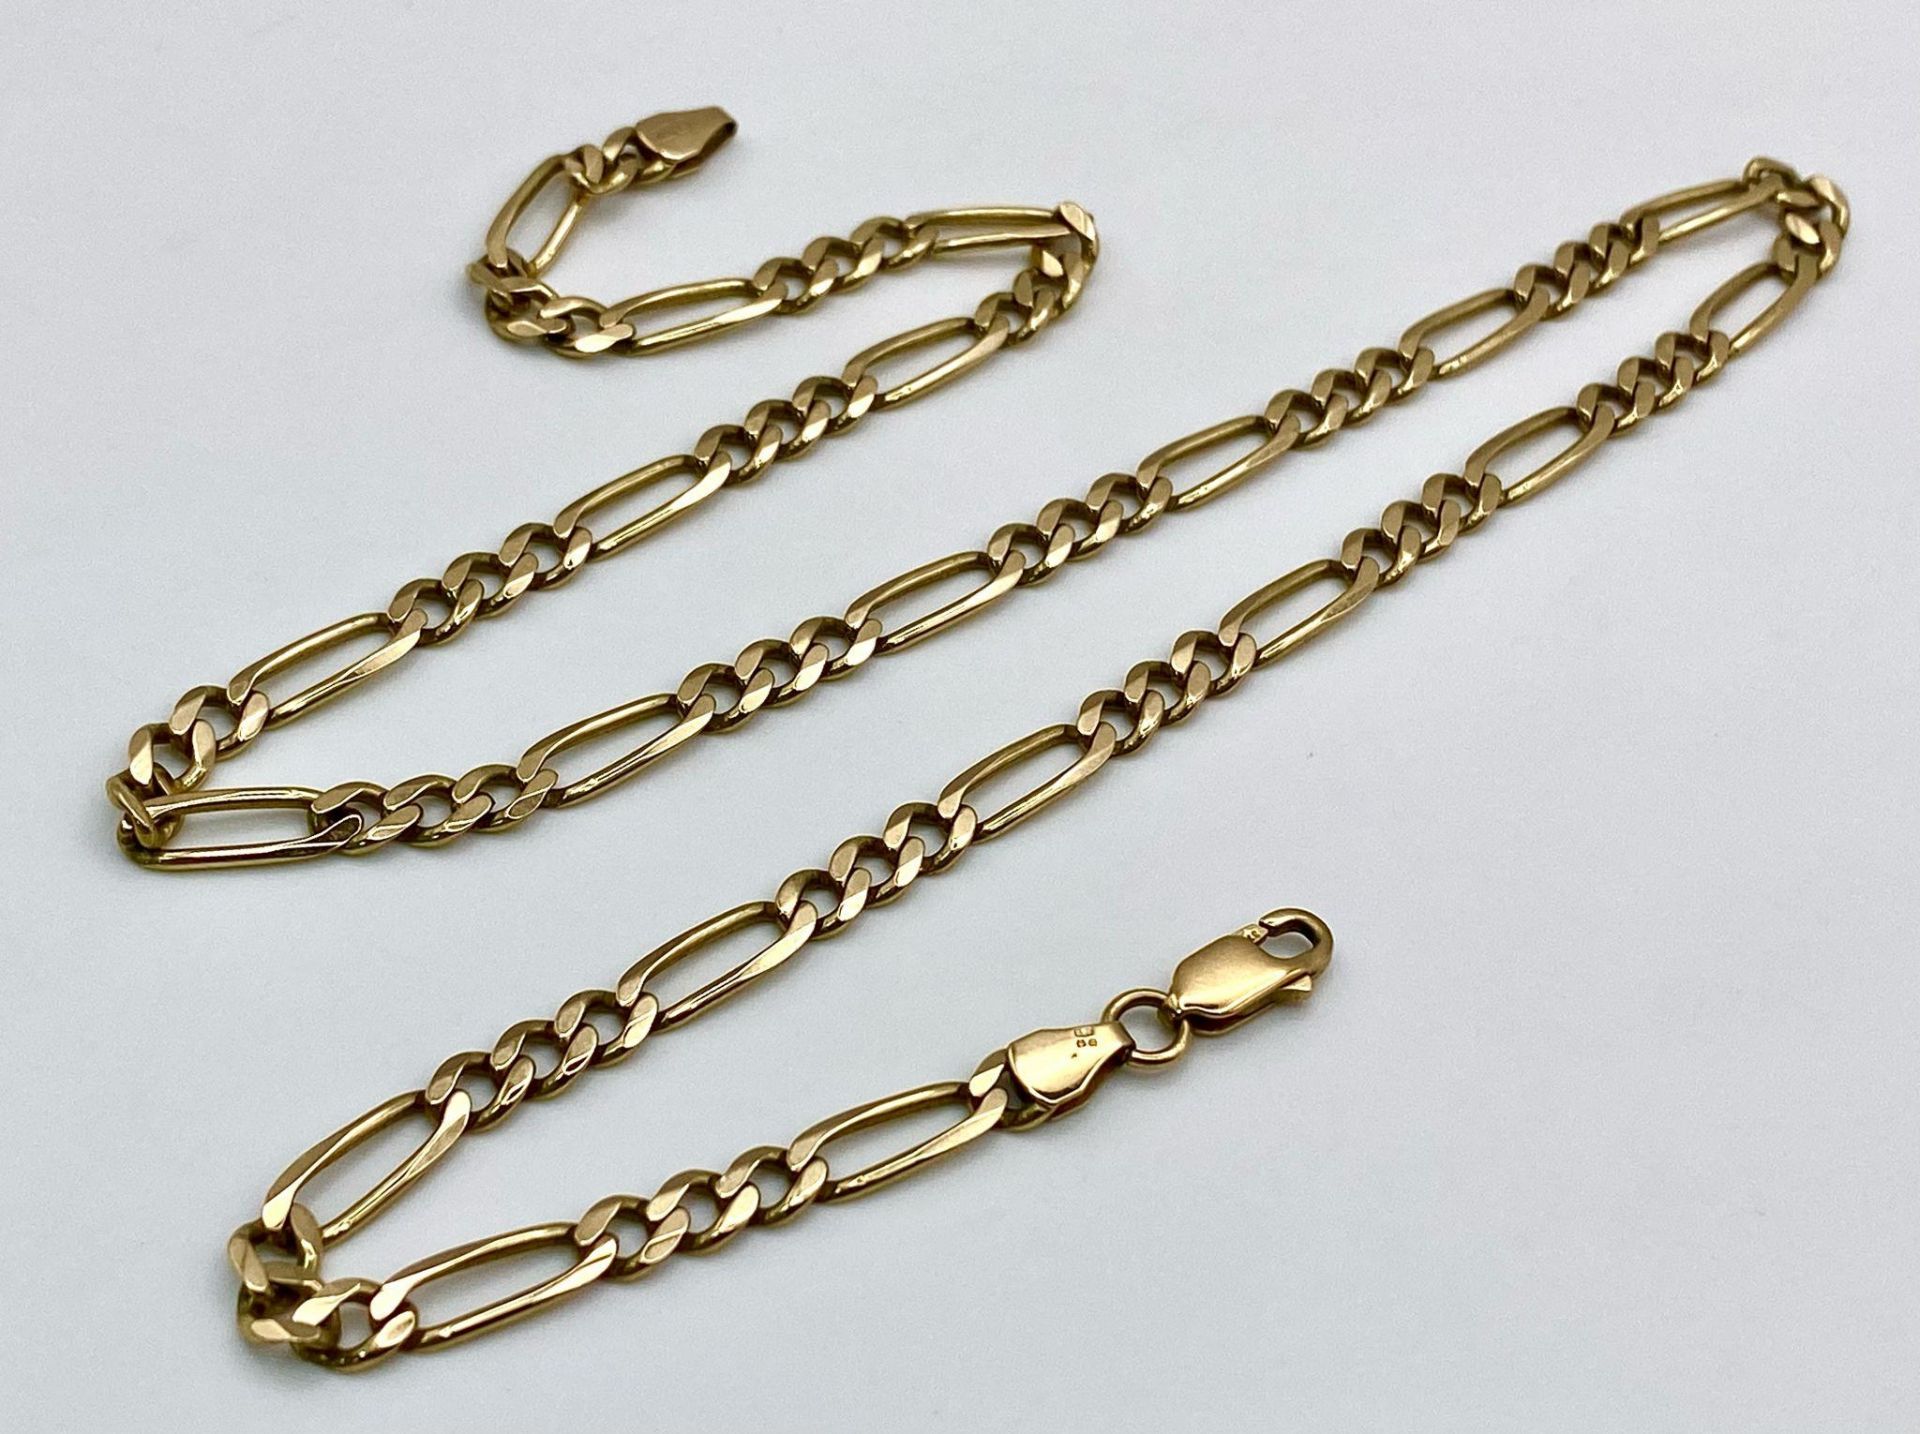 A Vintage 9K Yellow Gold Figaro Link Necklace. 45cm length. 14.1g weight.